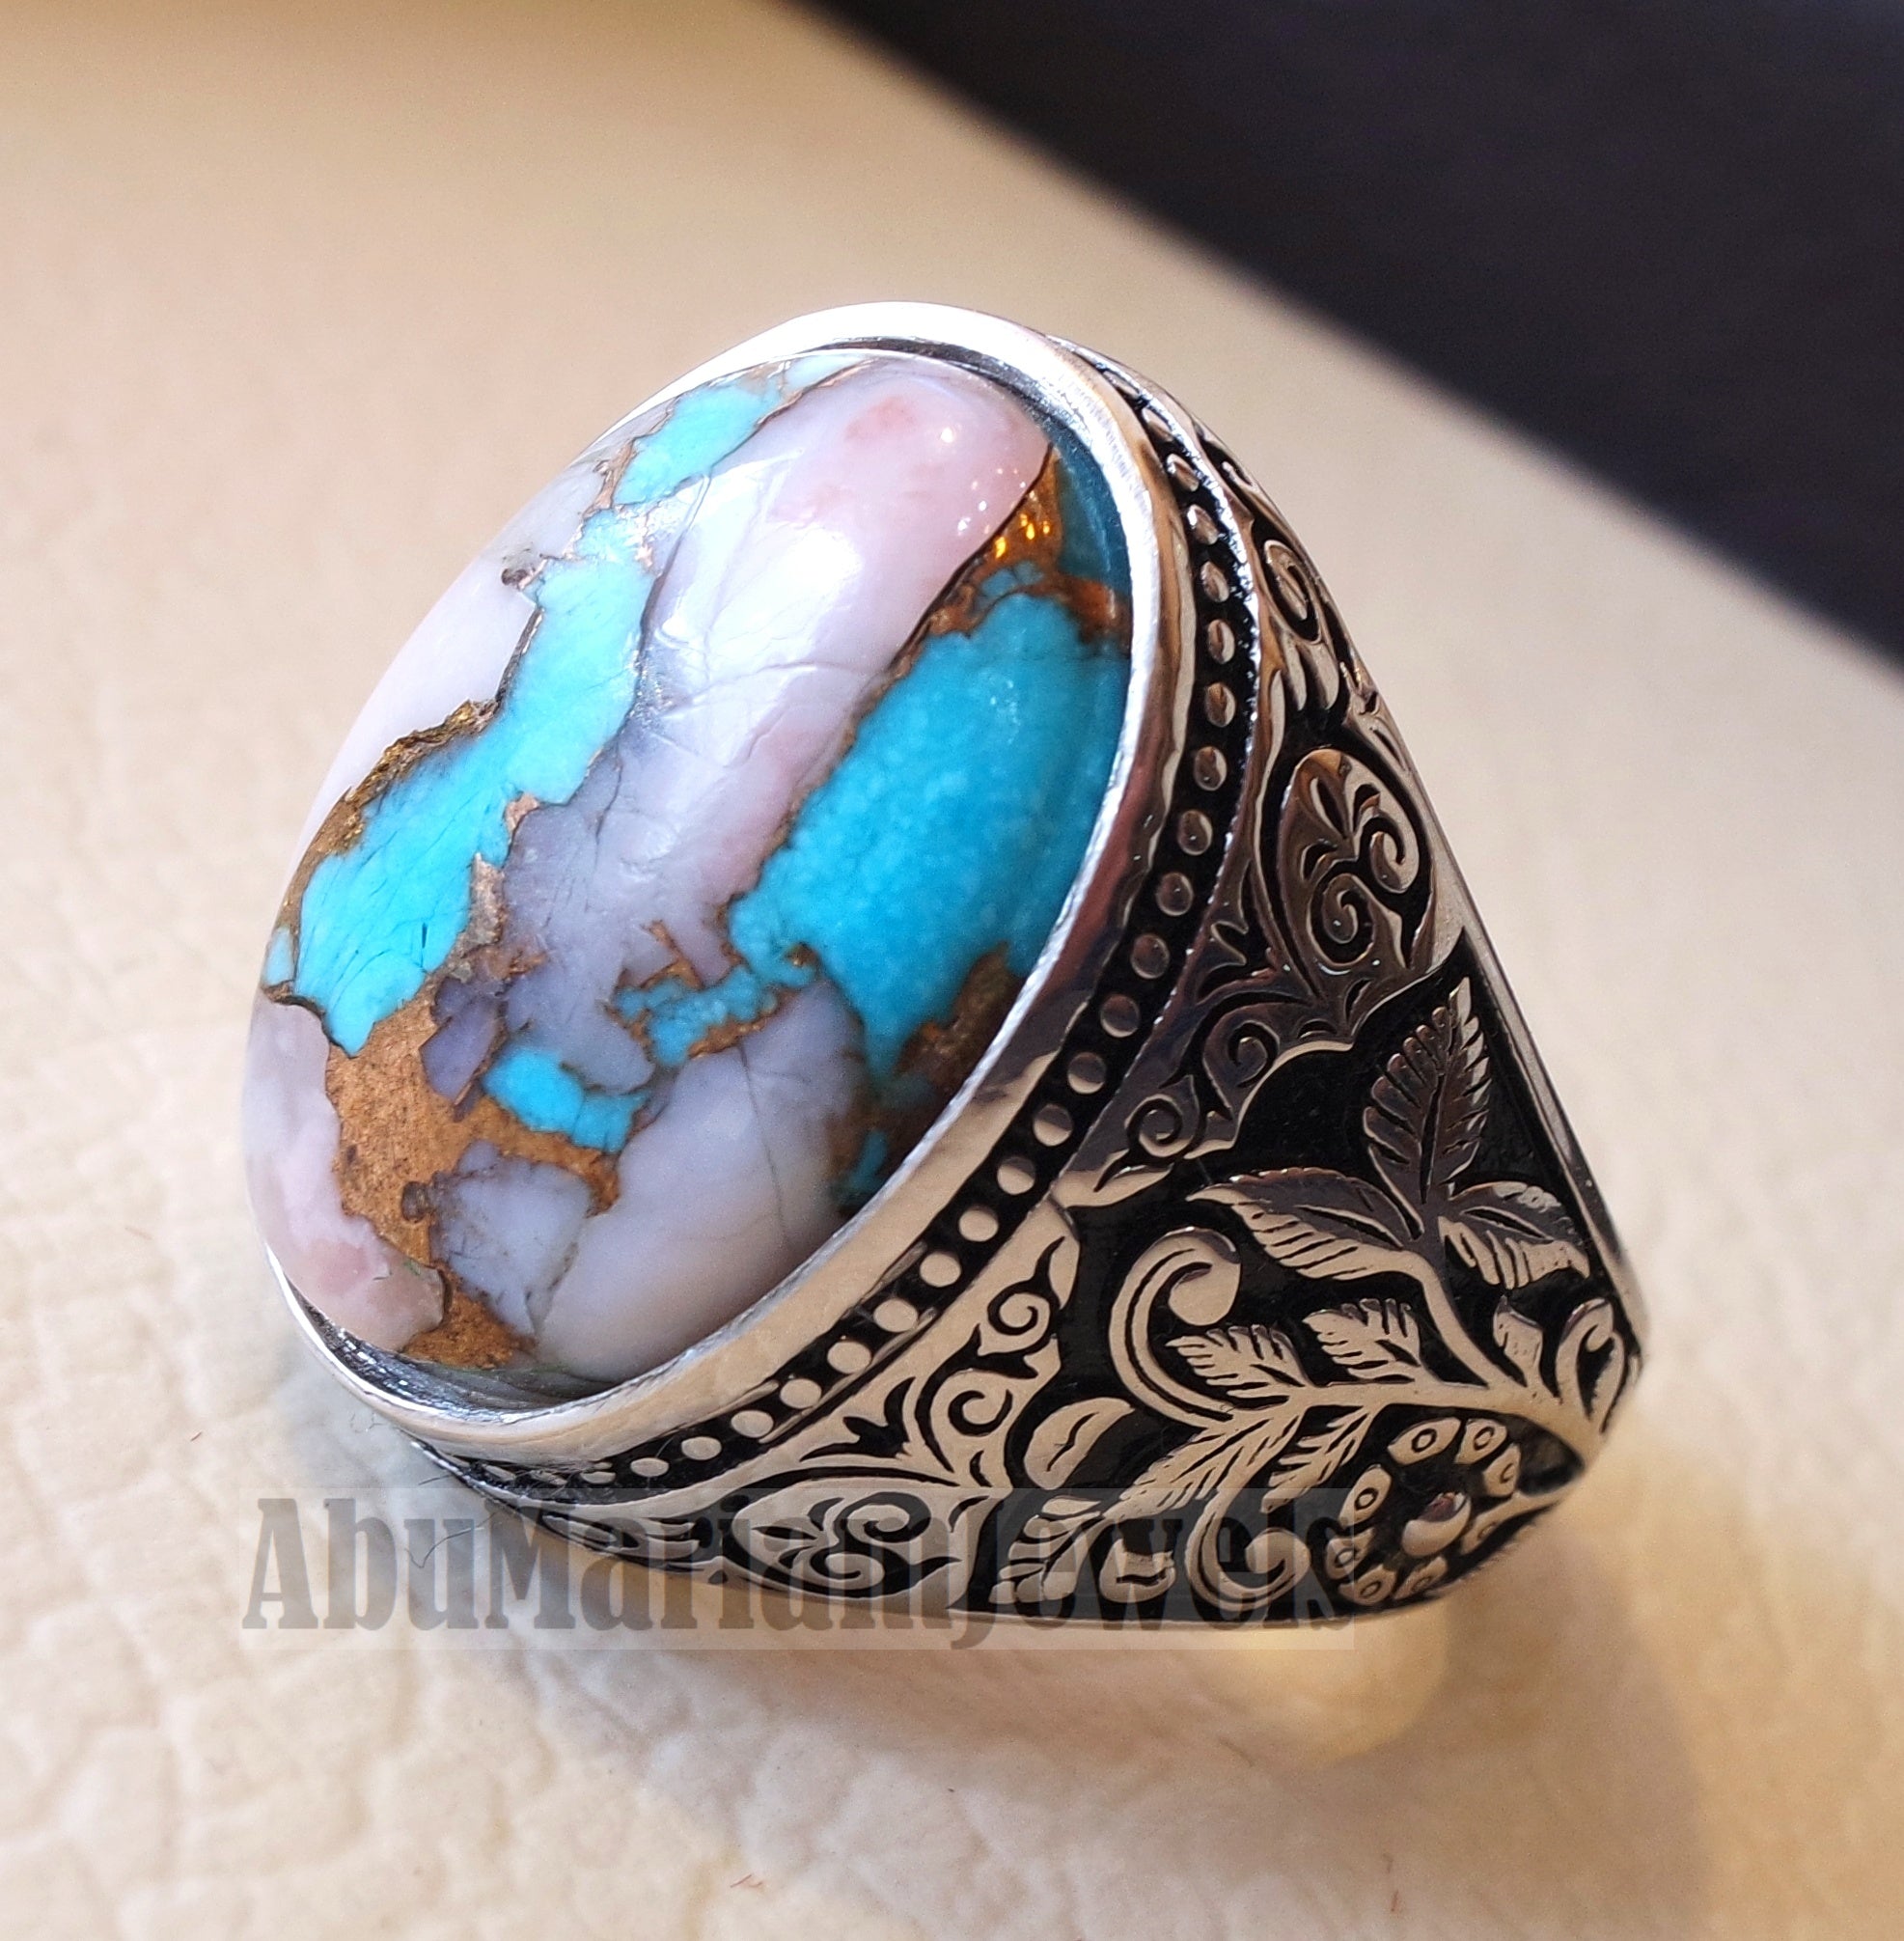 Copper pink Opal Turquoise blue natural stone ring sterling silver 925 men jewelry all sizes gem highest quality middle eastern style